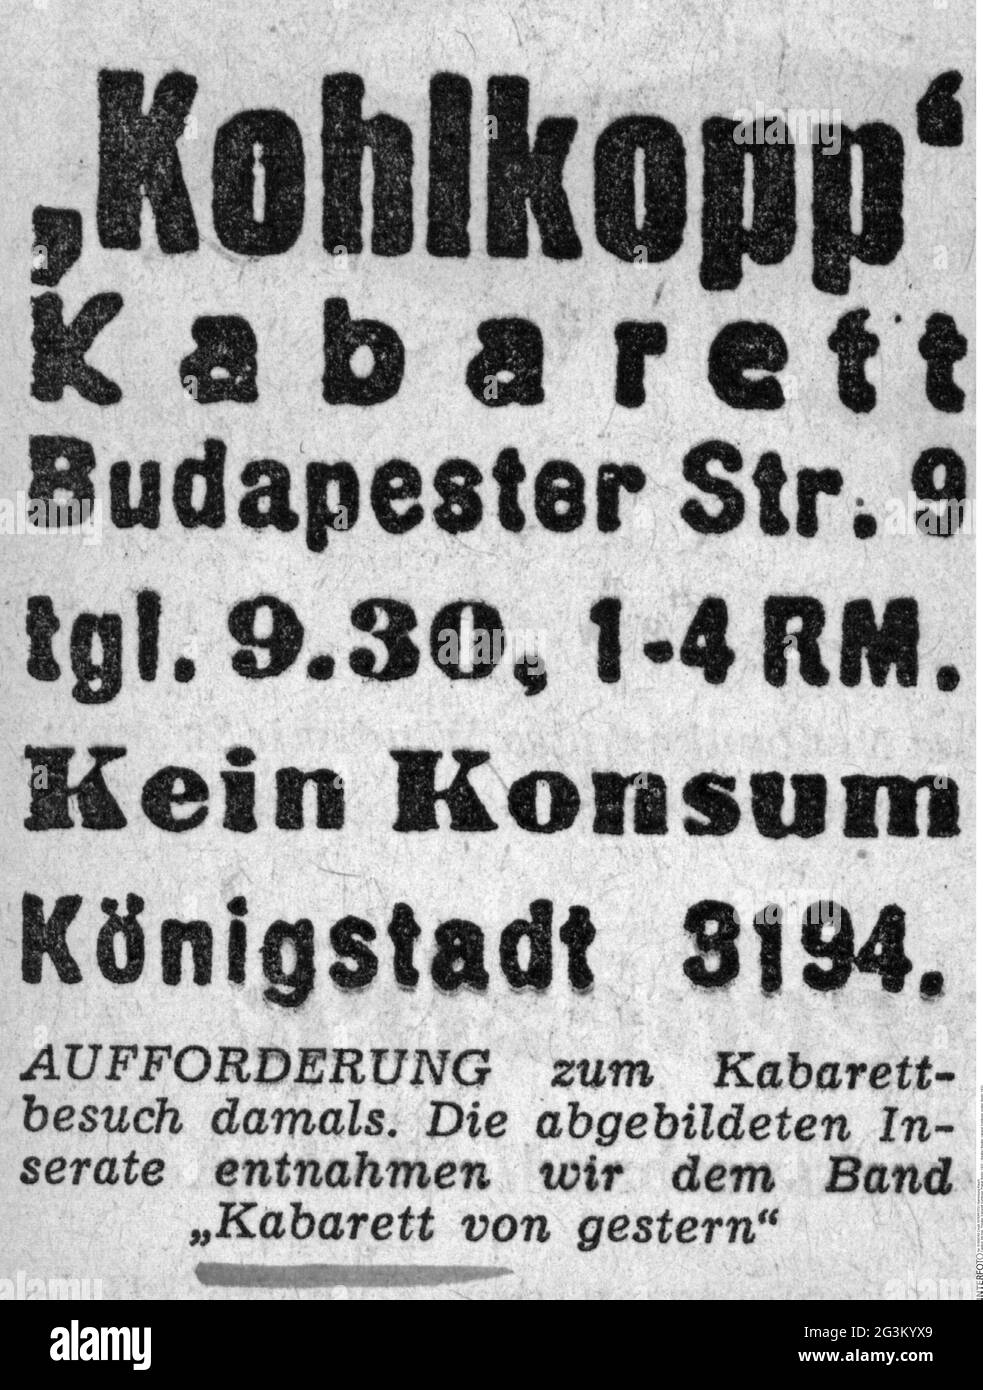 theatre / theater, cabaret, Kohlkopp, poster, Berlin, 1932, ARTIST'S COPYRIGHT HAS NOT TO BE CLEARED Stock Photo